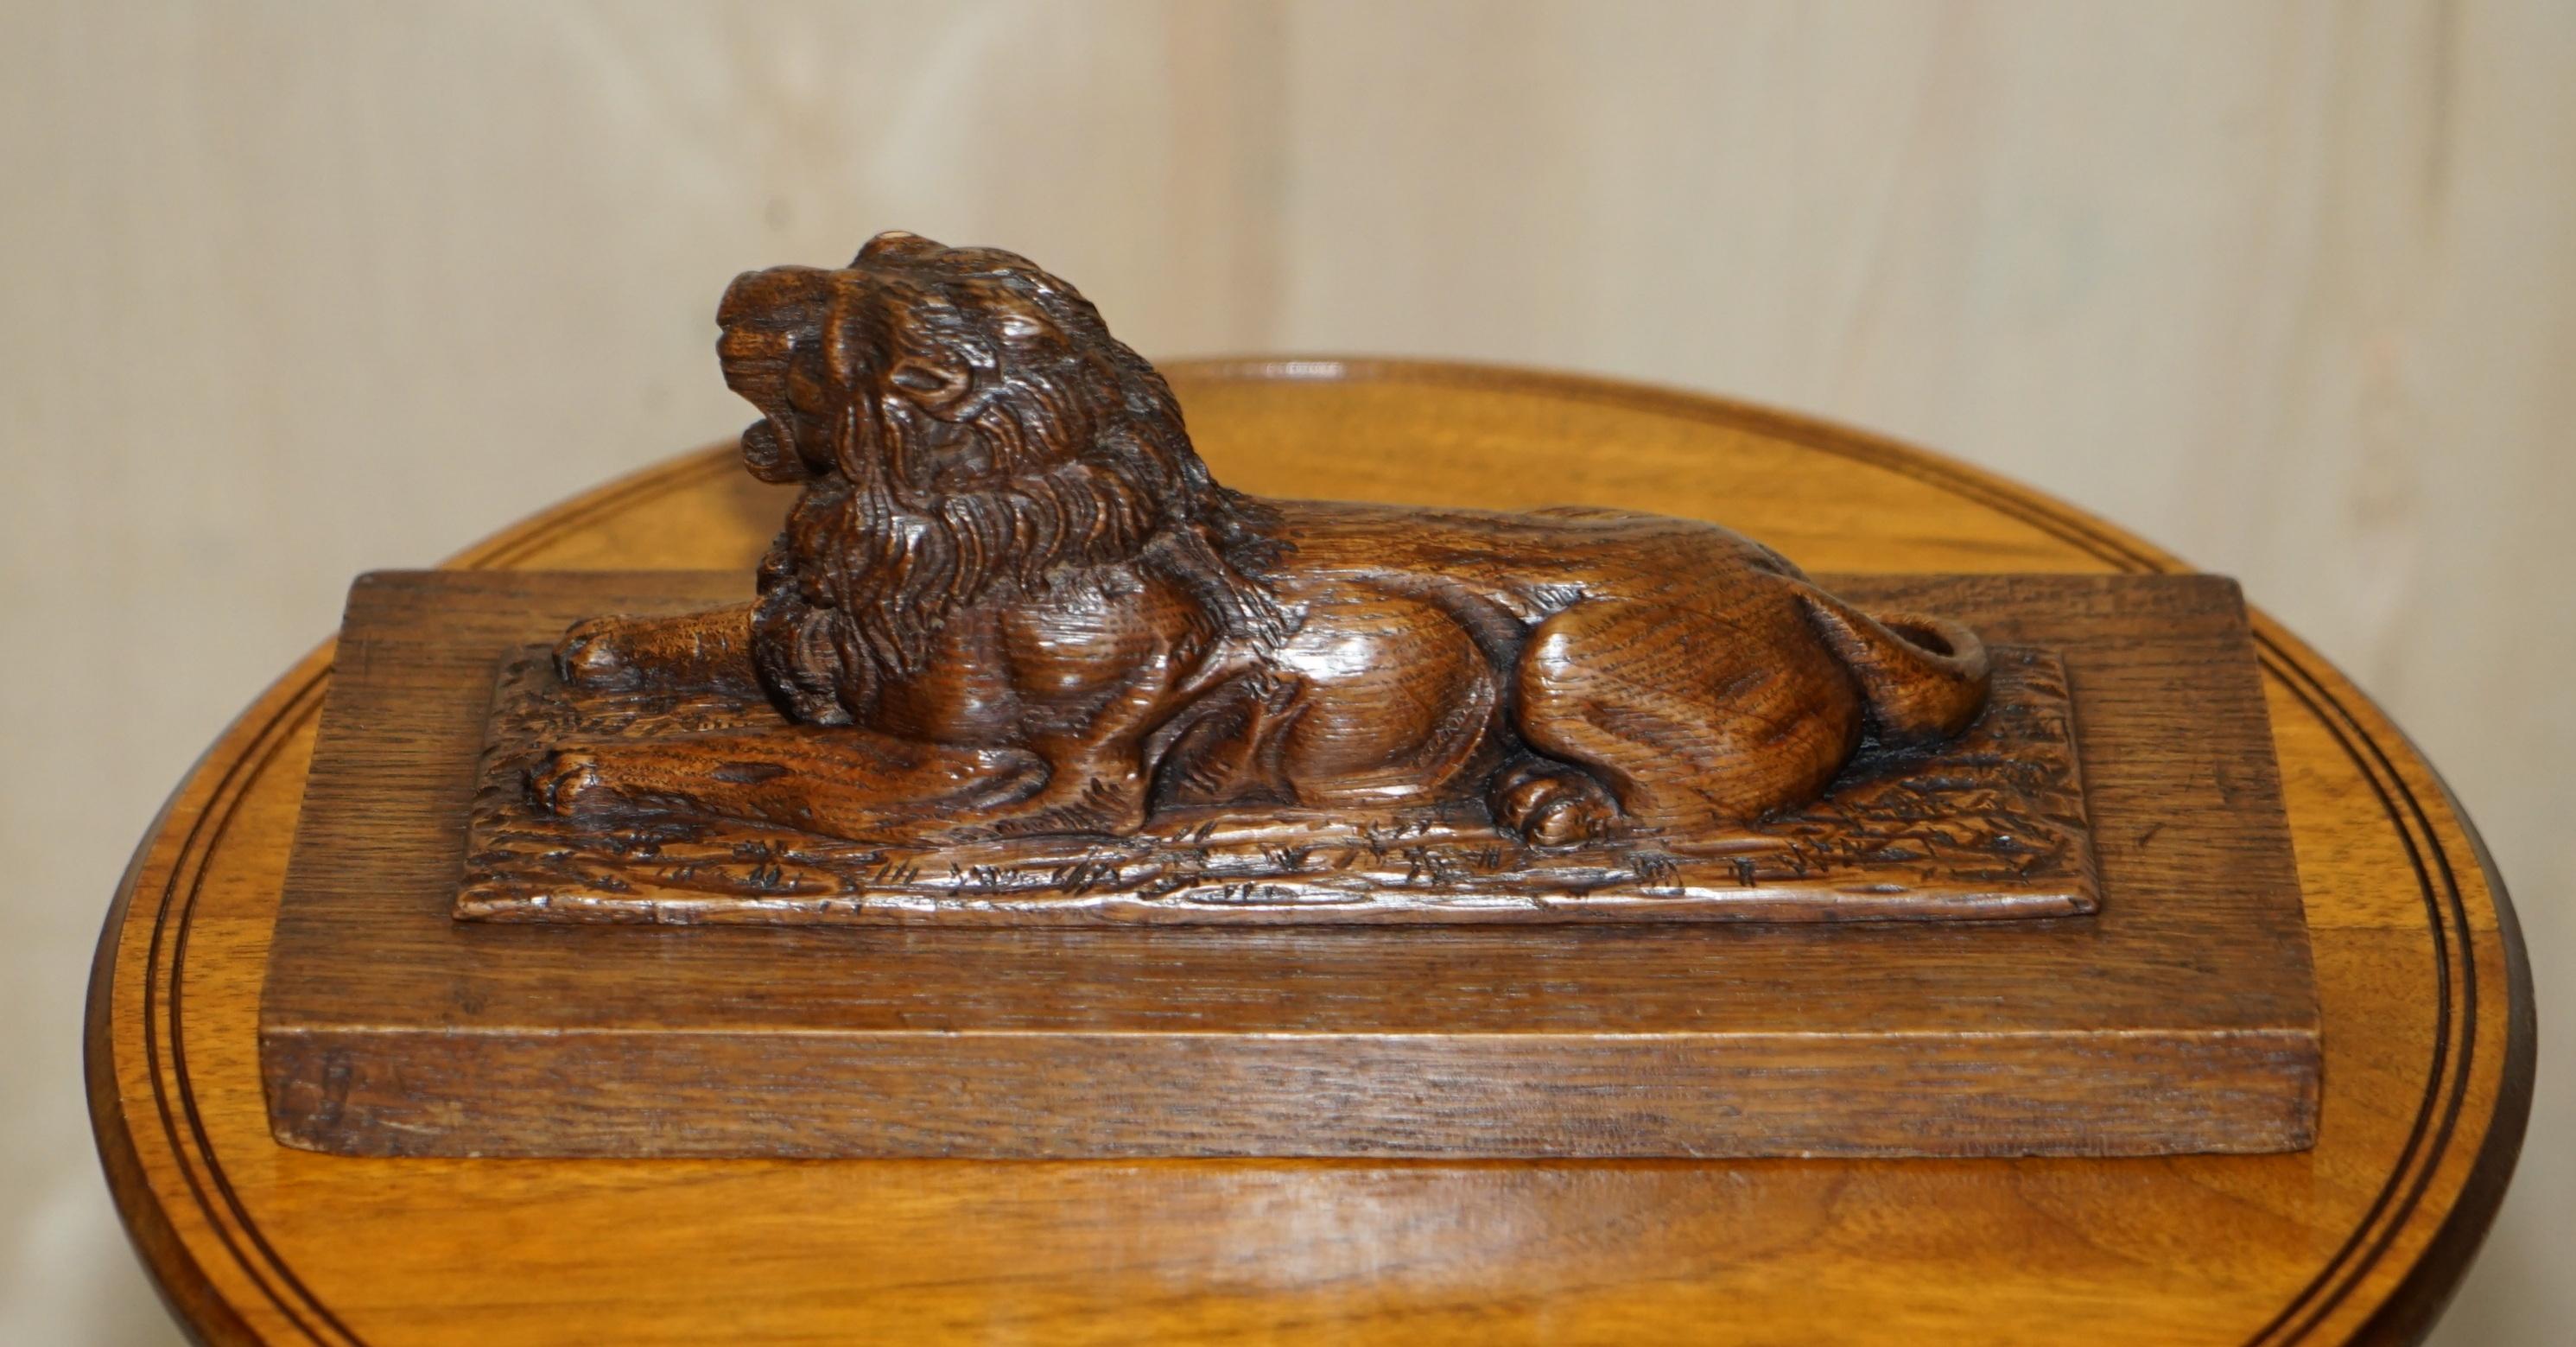 Stunning Antique circa 1860 Hand Carved English Oak Recumbent Lion Statue For Sale 2